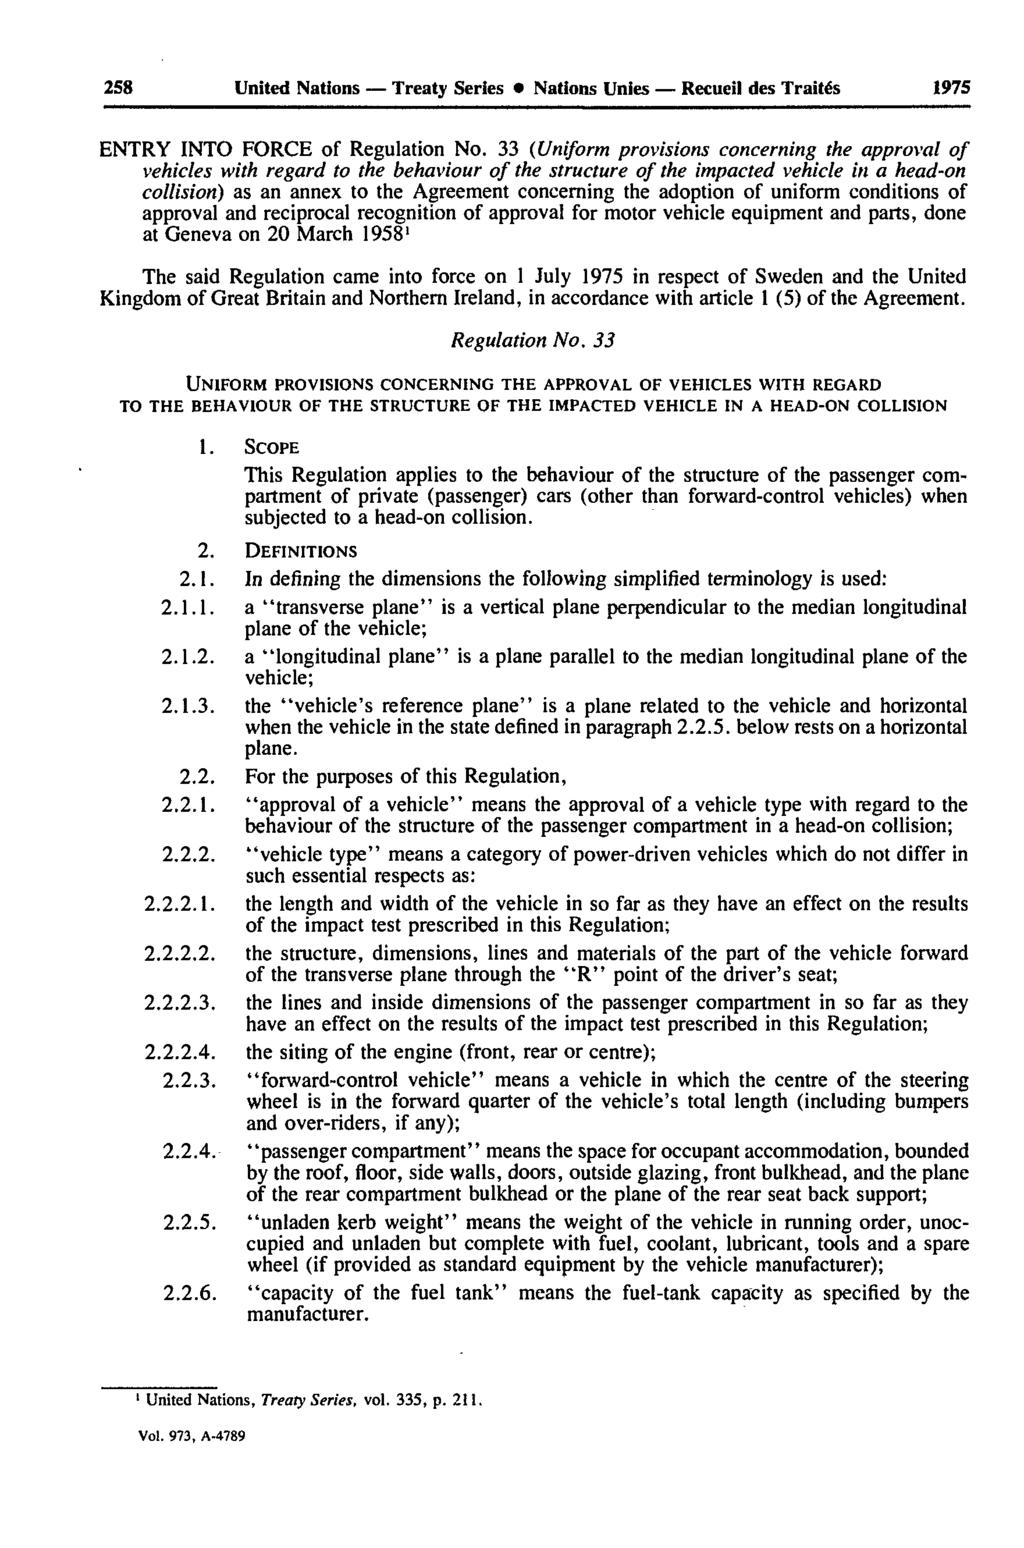 258 United Nations Treaty Series Nations Unies Recueil des Traités 1975 ENTRY INTO FORCE of Regulation No.